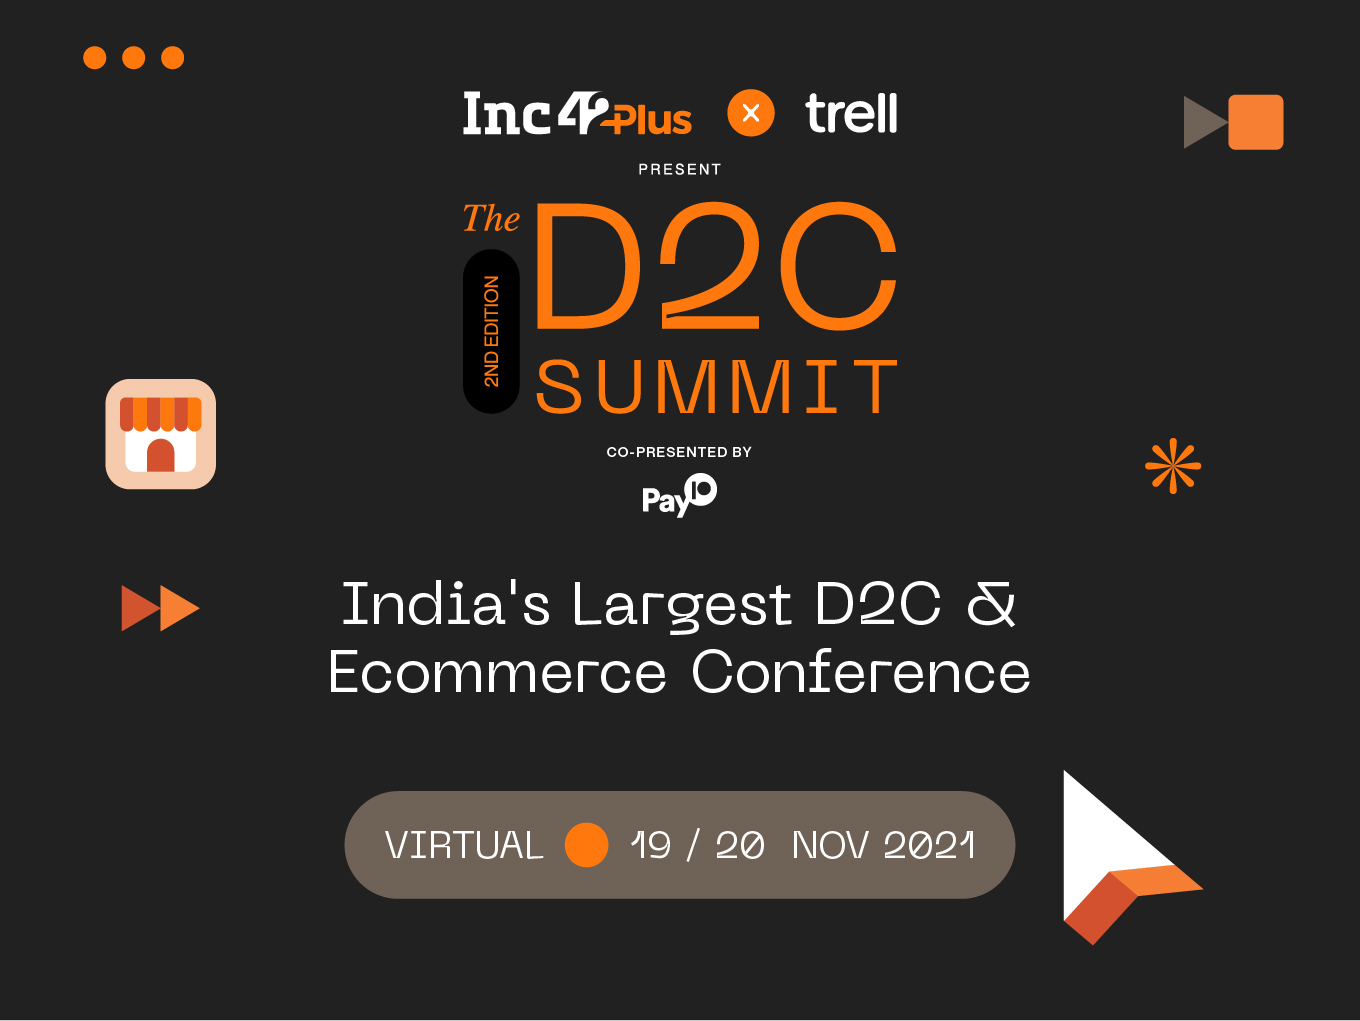 The D2C Summit By Inc42 Plus